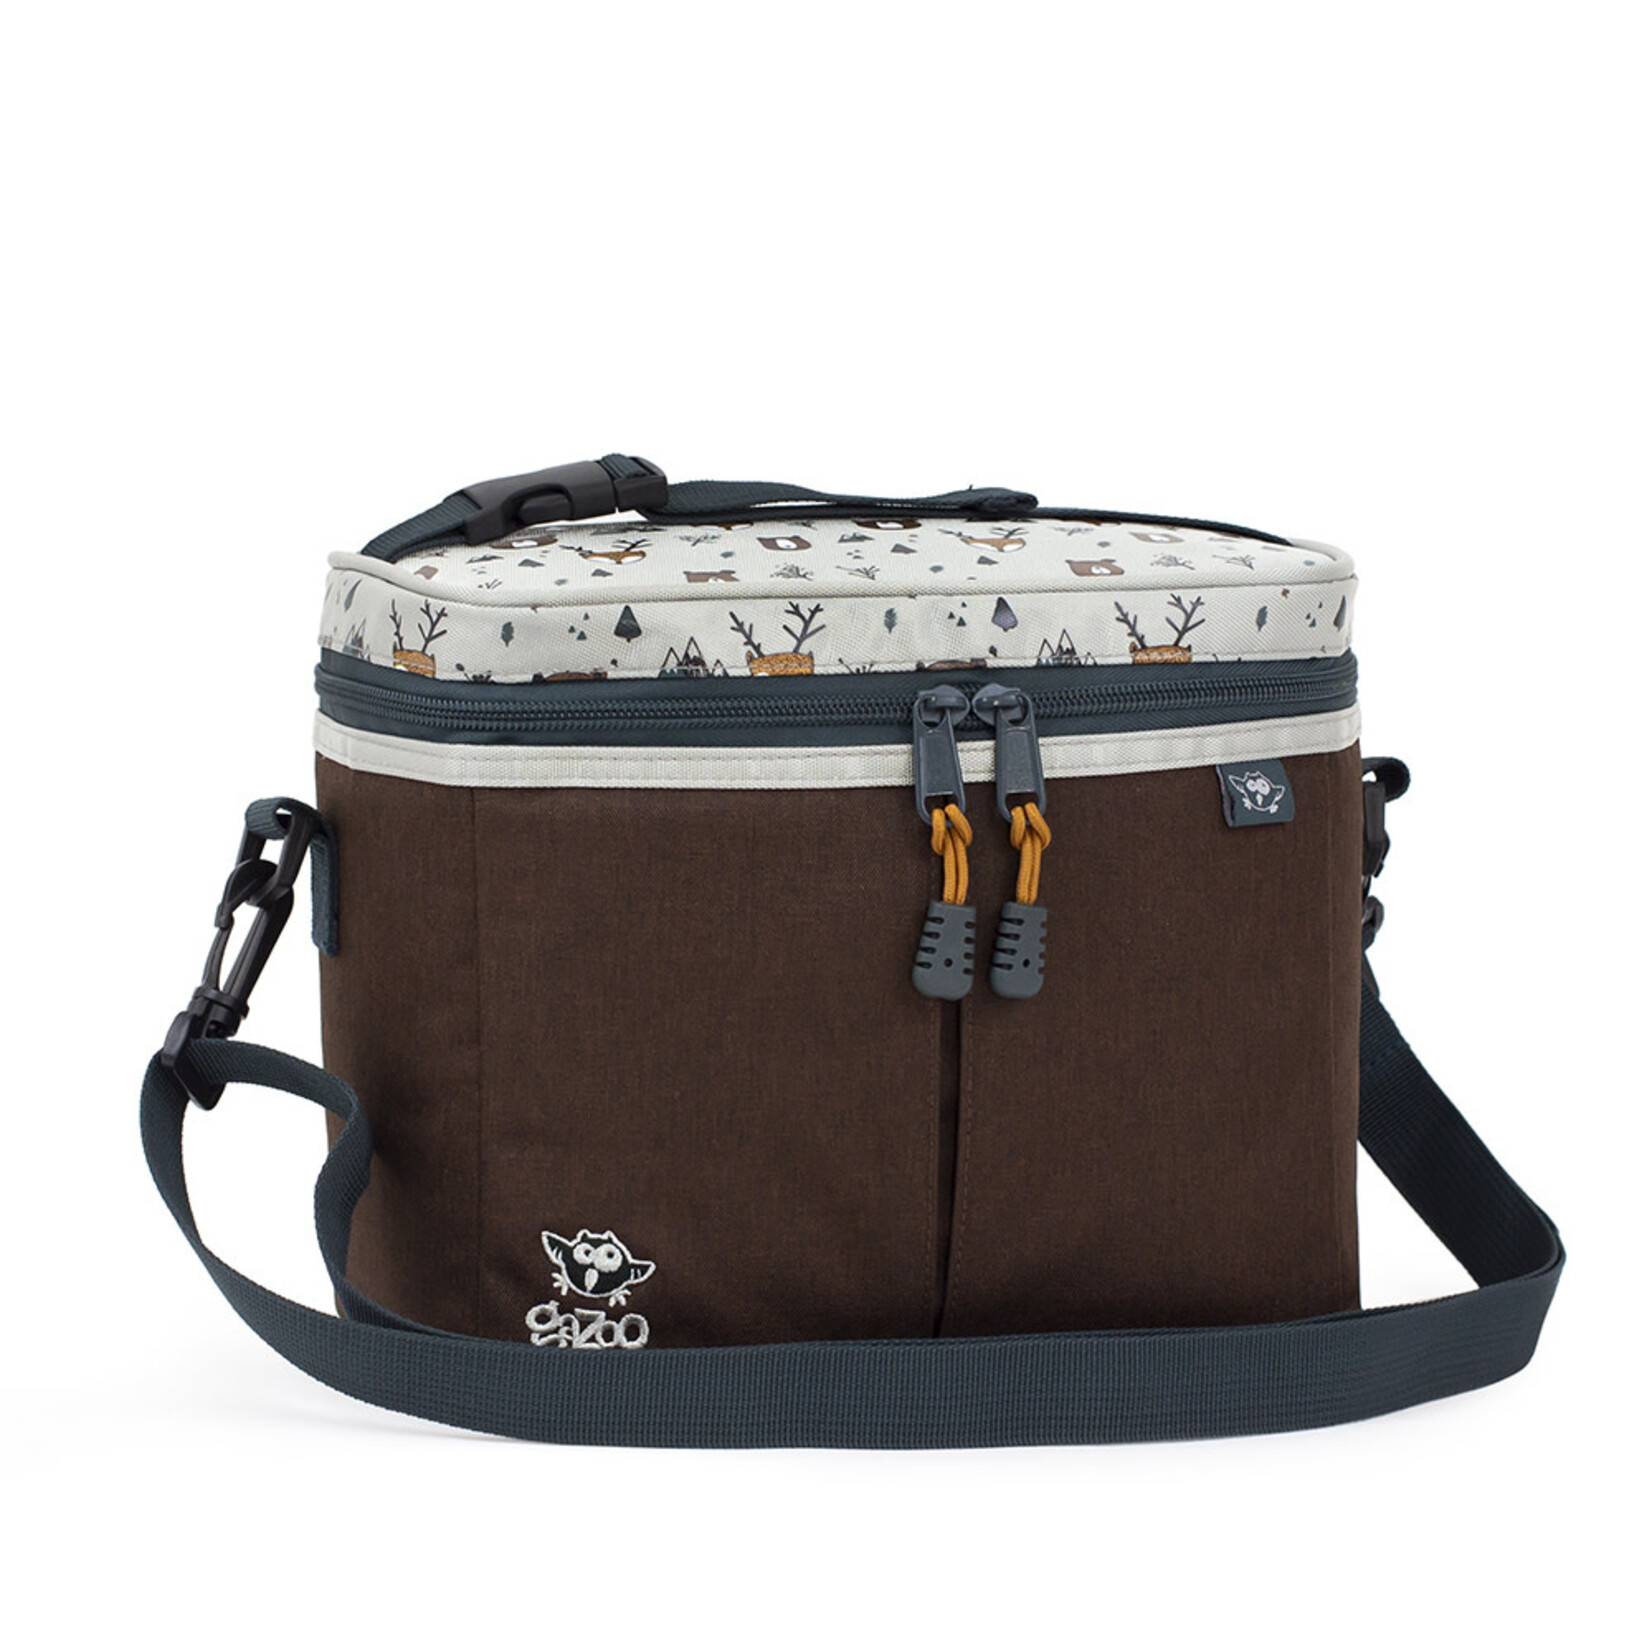 GEOCAN GEOCAN- Rectangular lunch box - Grey brown with forest animal print